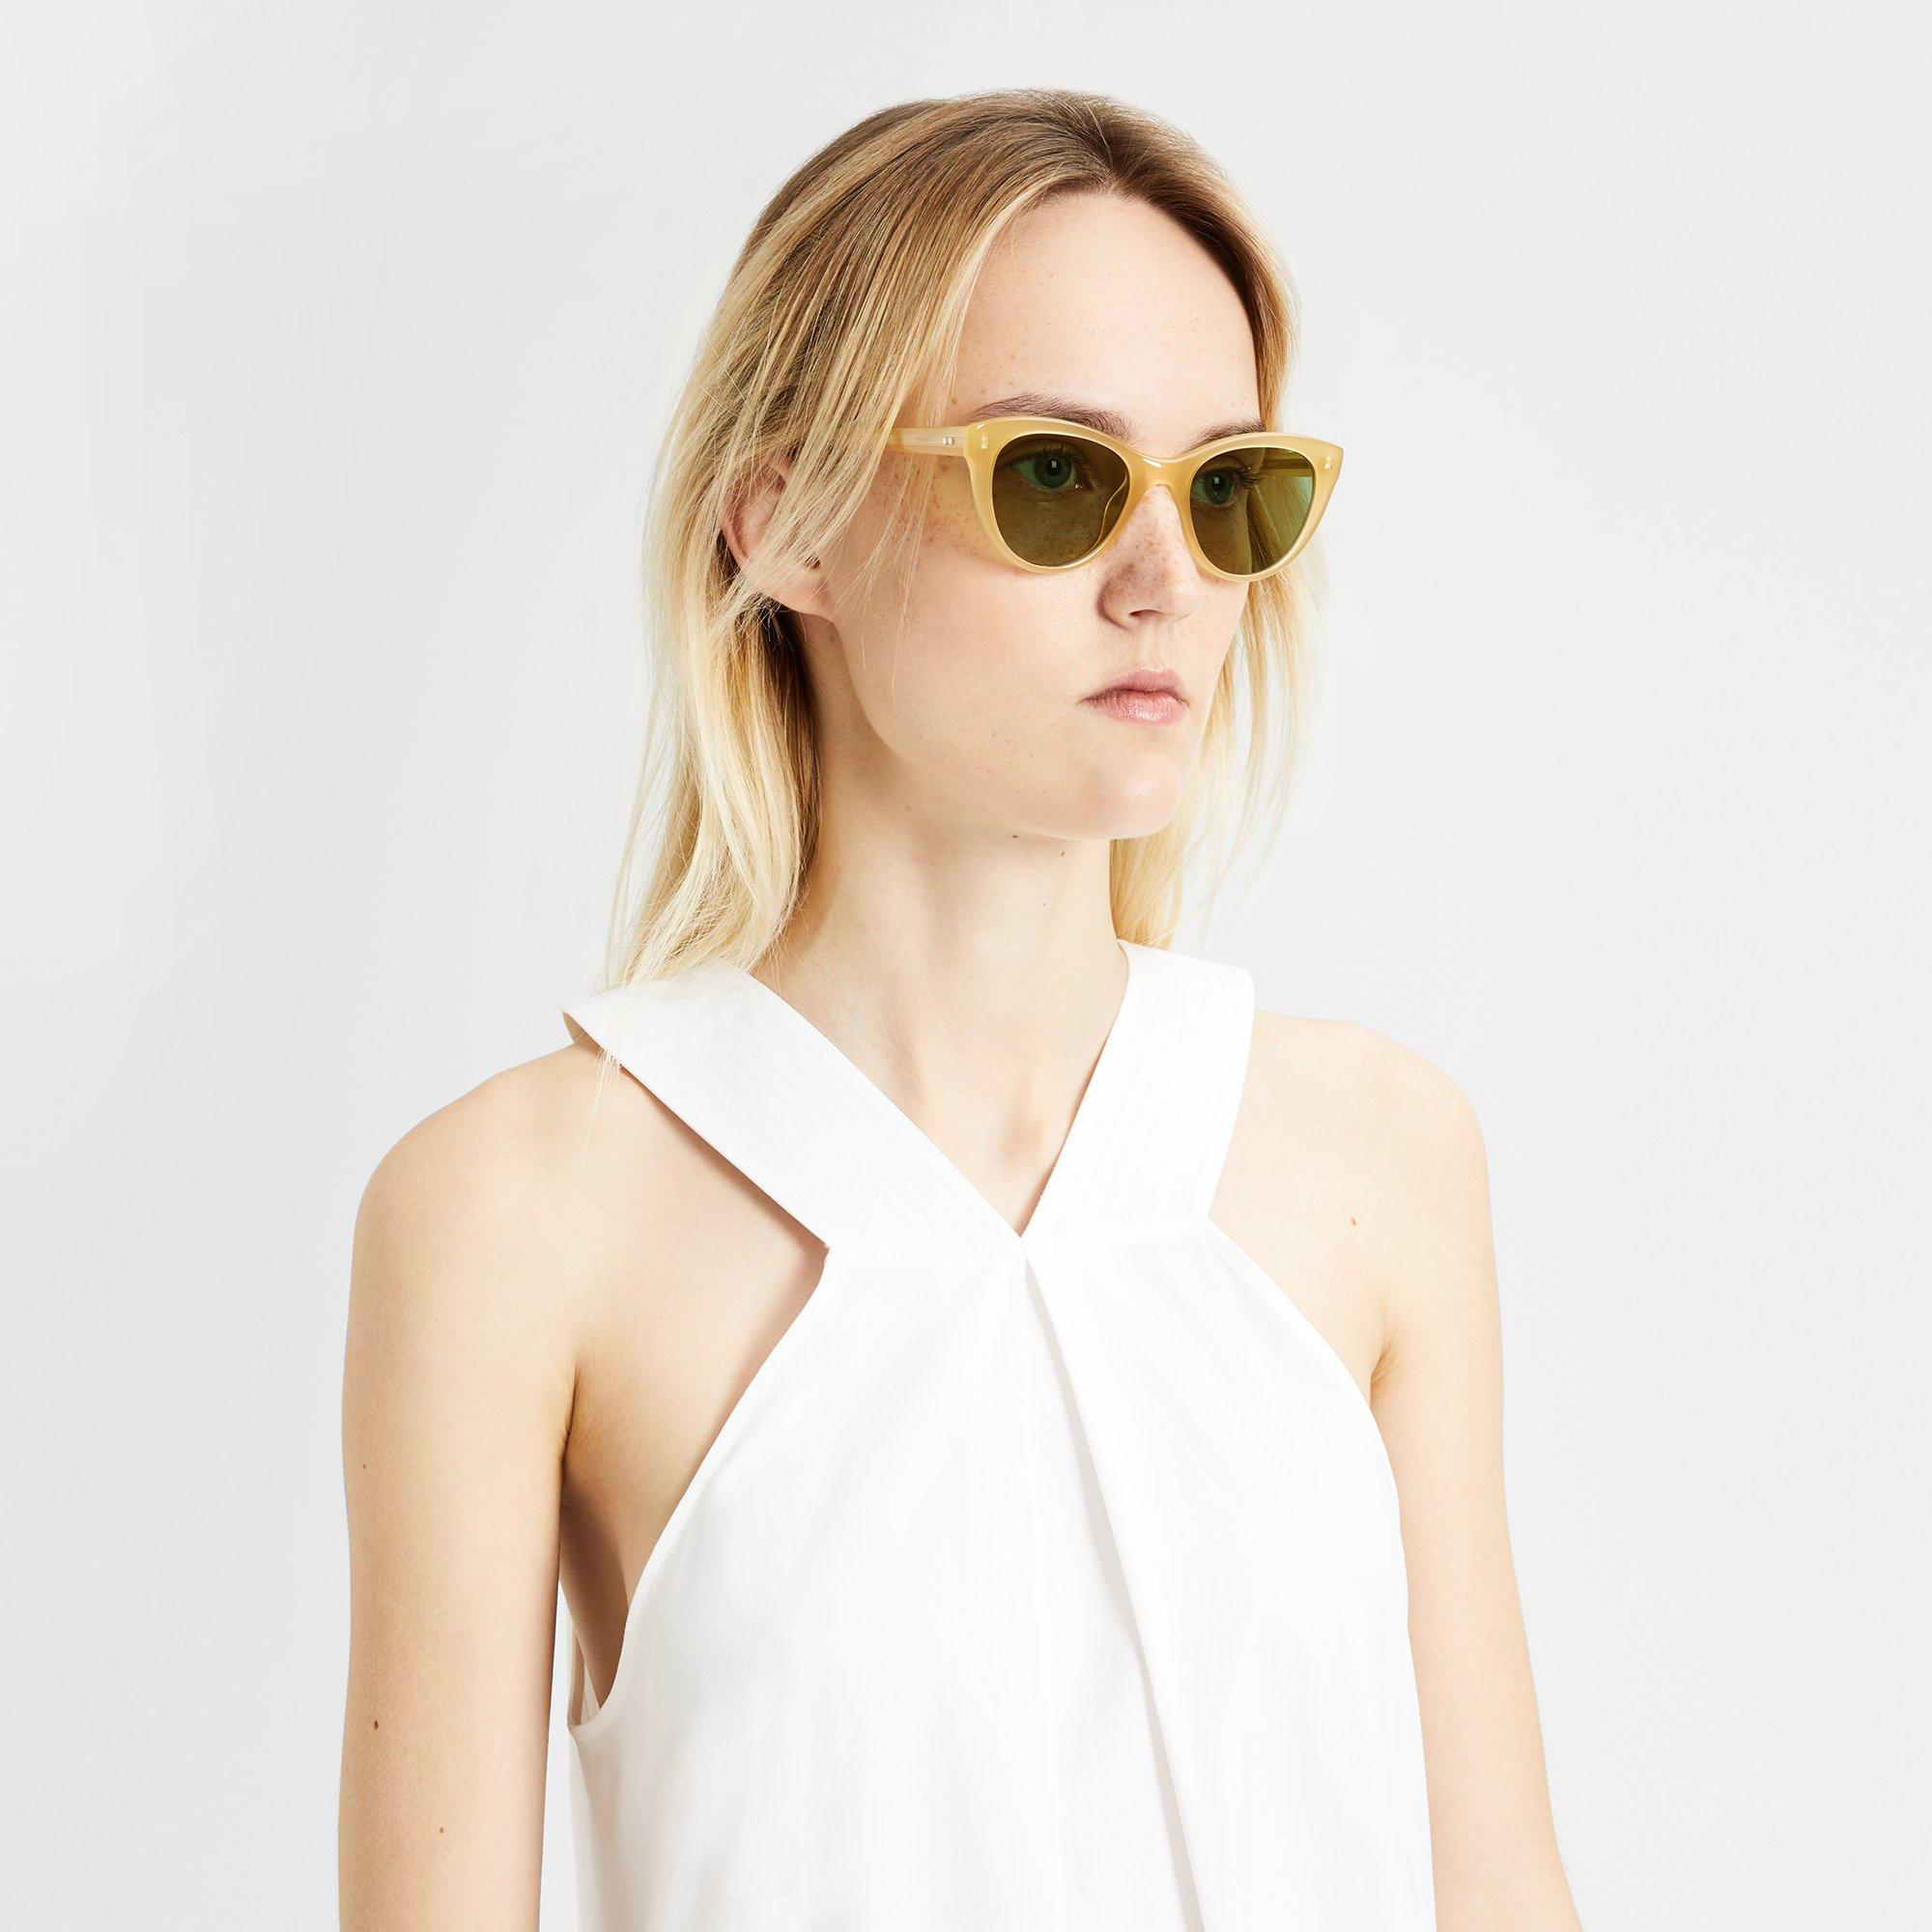 Theory Official Site  Garrett Leight x Clare V. Sunglasses